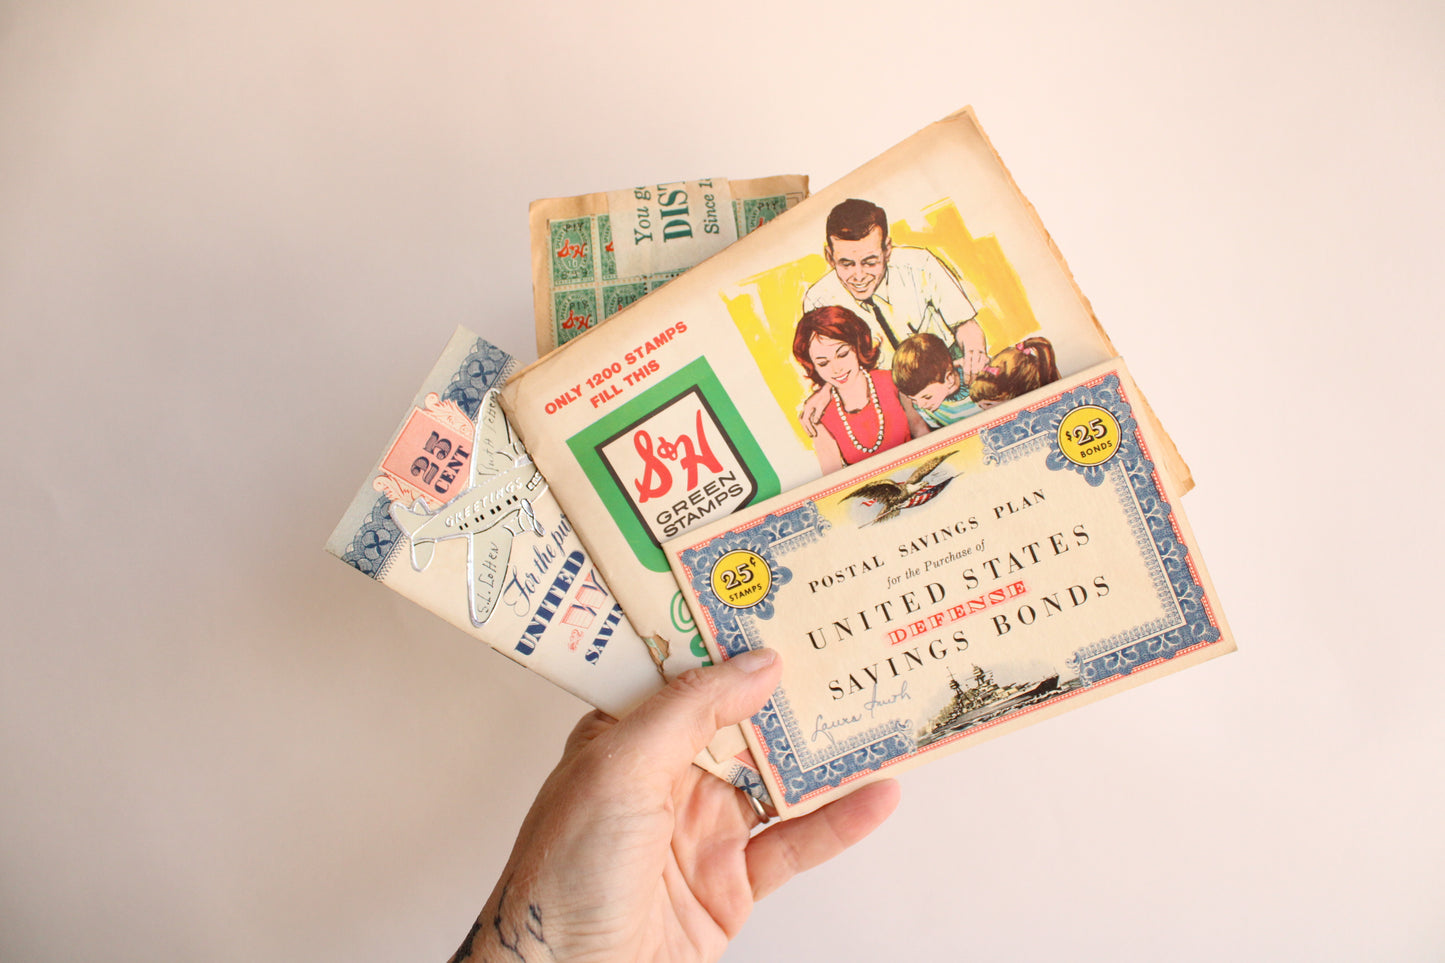 Vintage 1940s 1950s Savings Bond and Green Stamps Books